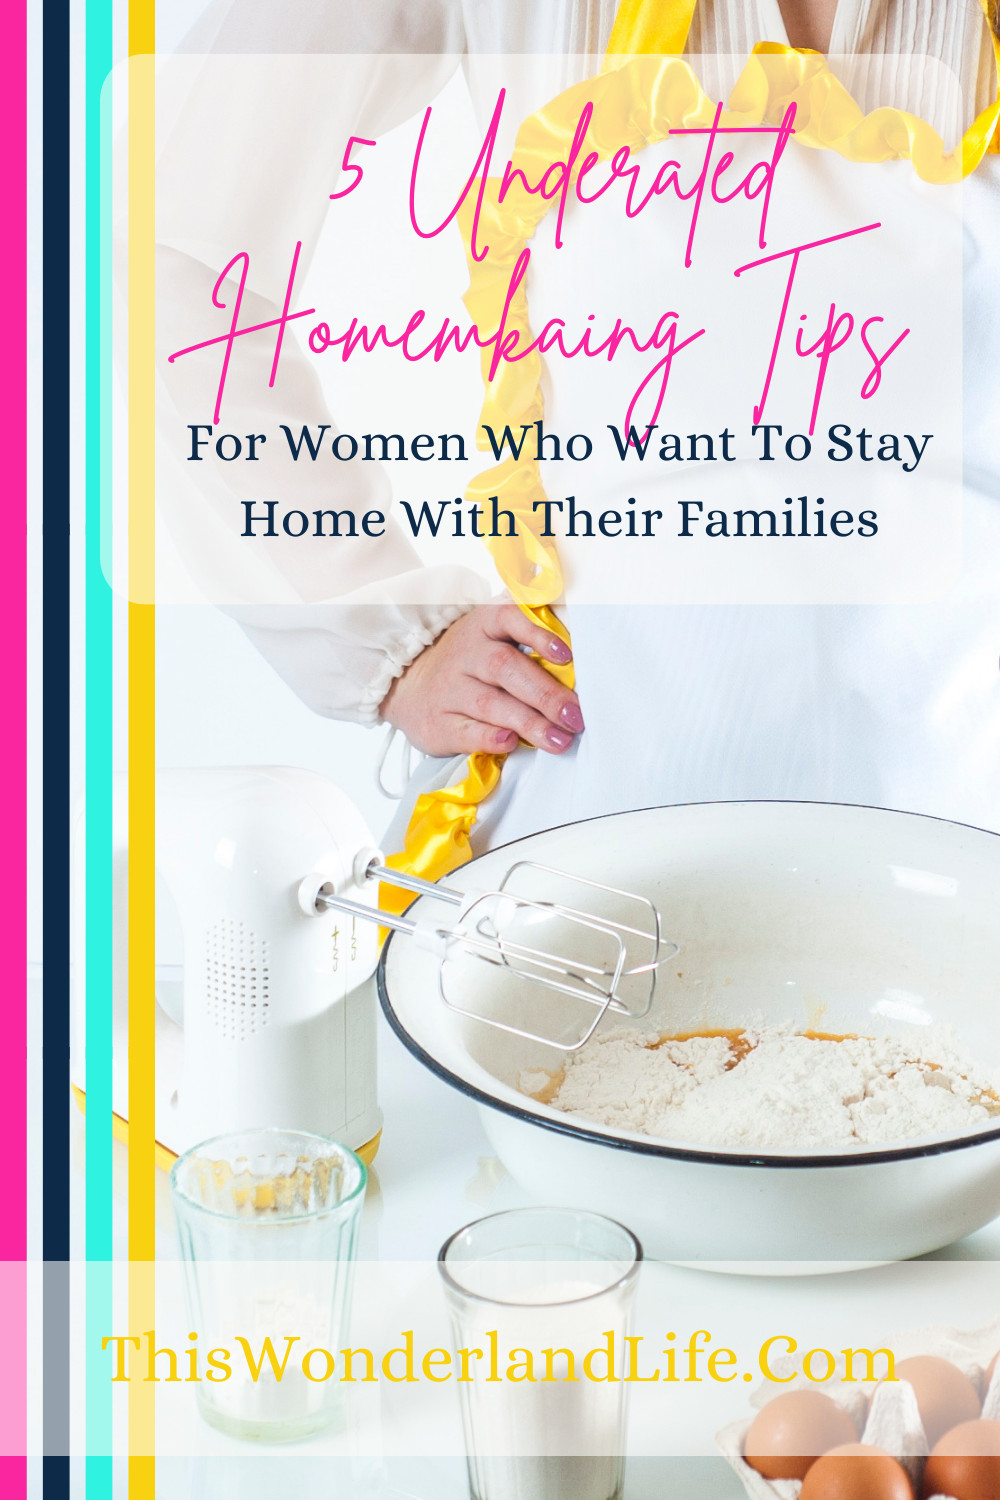 5 Underrated Homemaking Tips for Women Who Want to Stay Home with Their Families